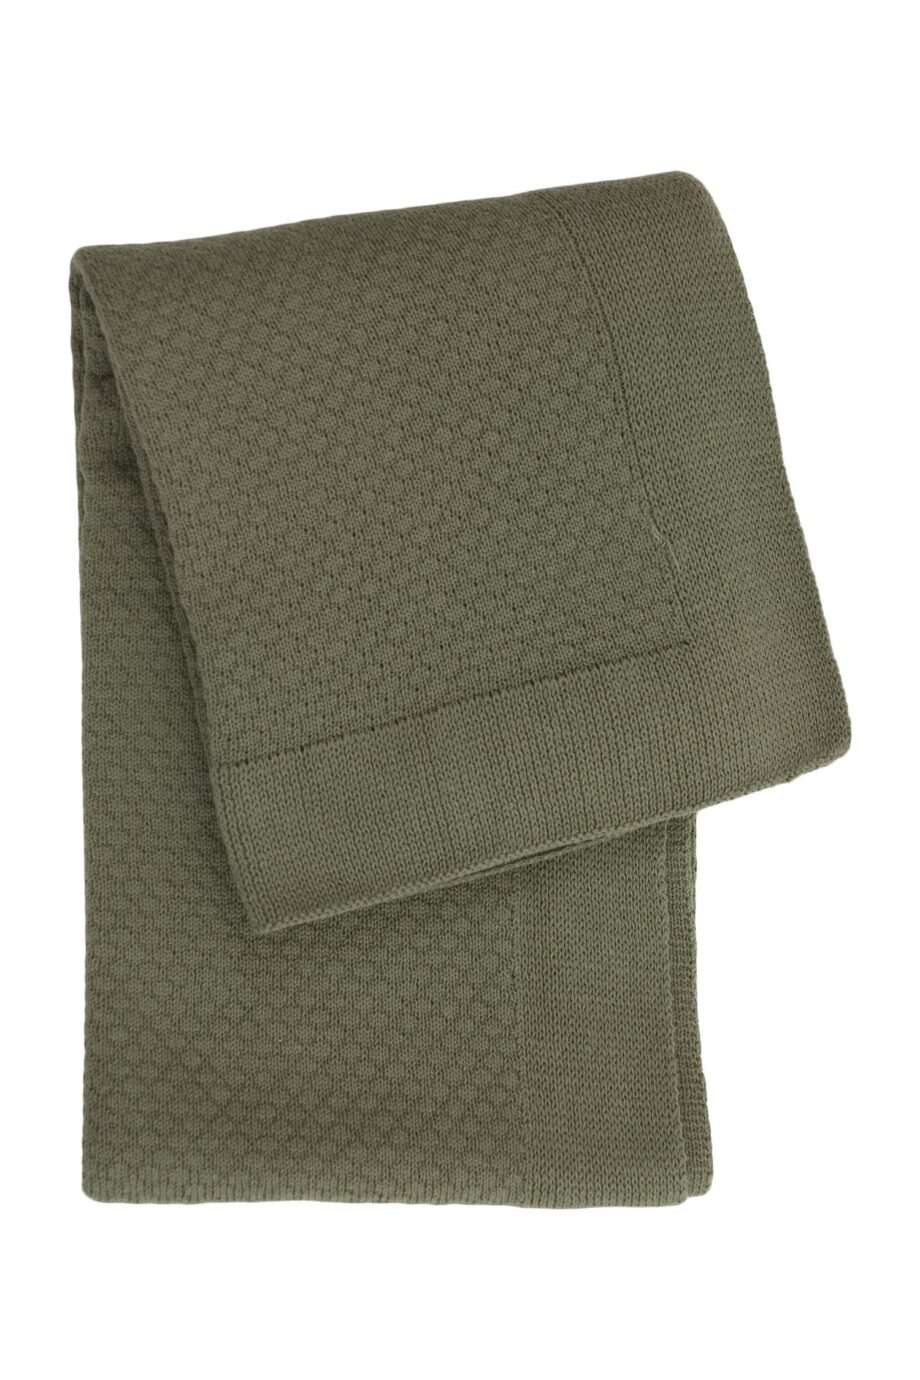 liz olive green knitted cotton little blanket small